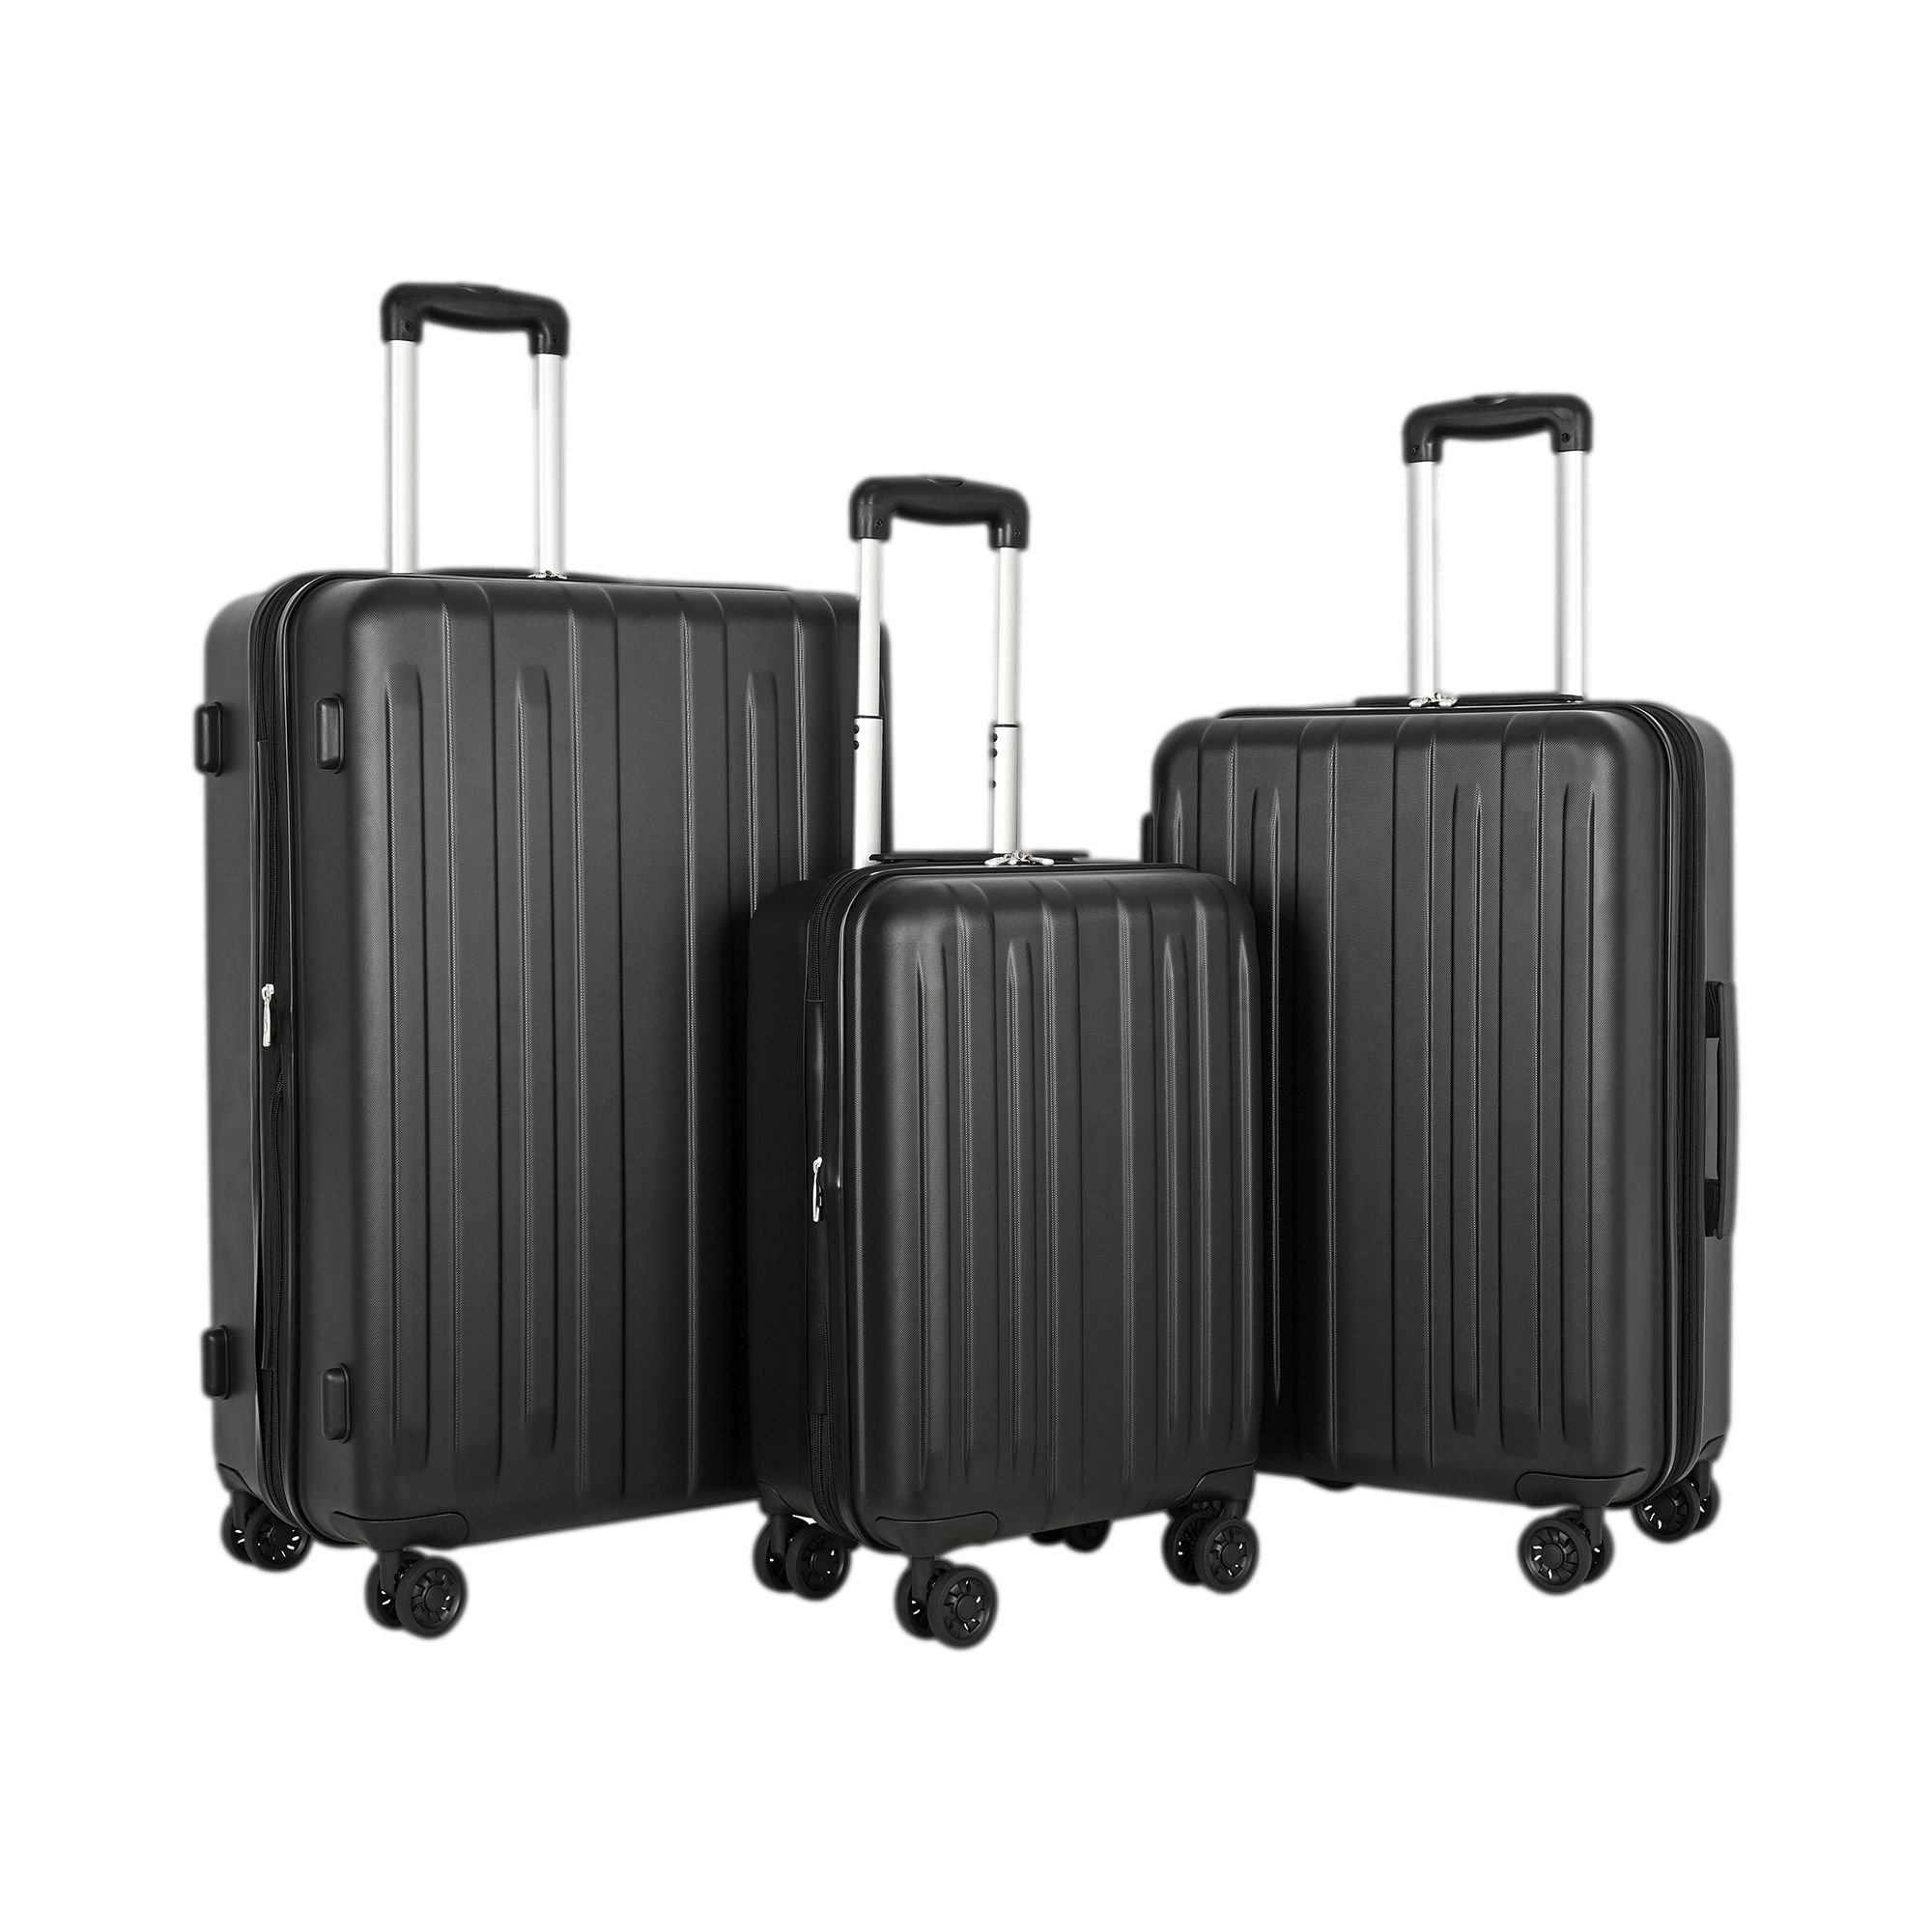 Caster Wheel Black Mini Luggage Trolley Bag, For Travelling, Size